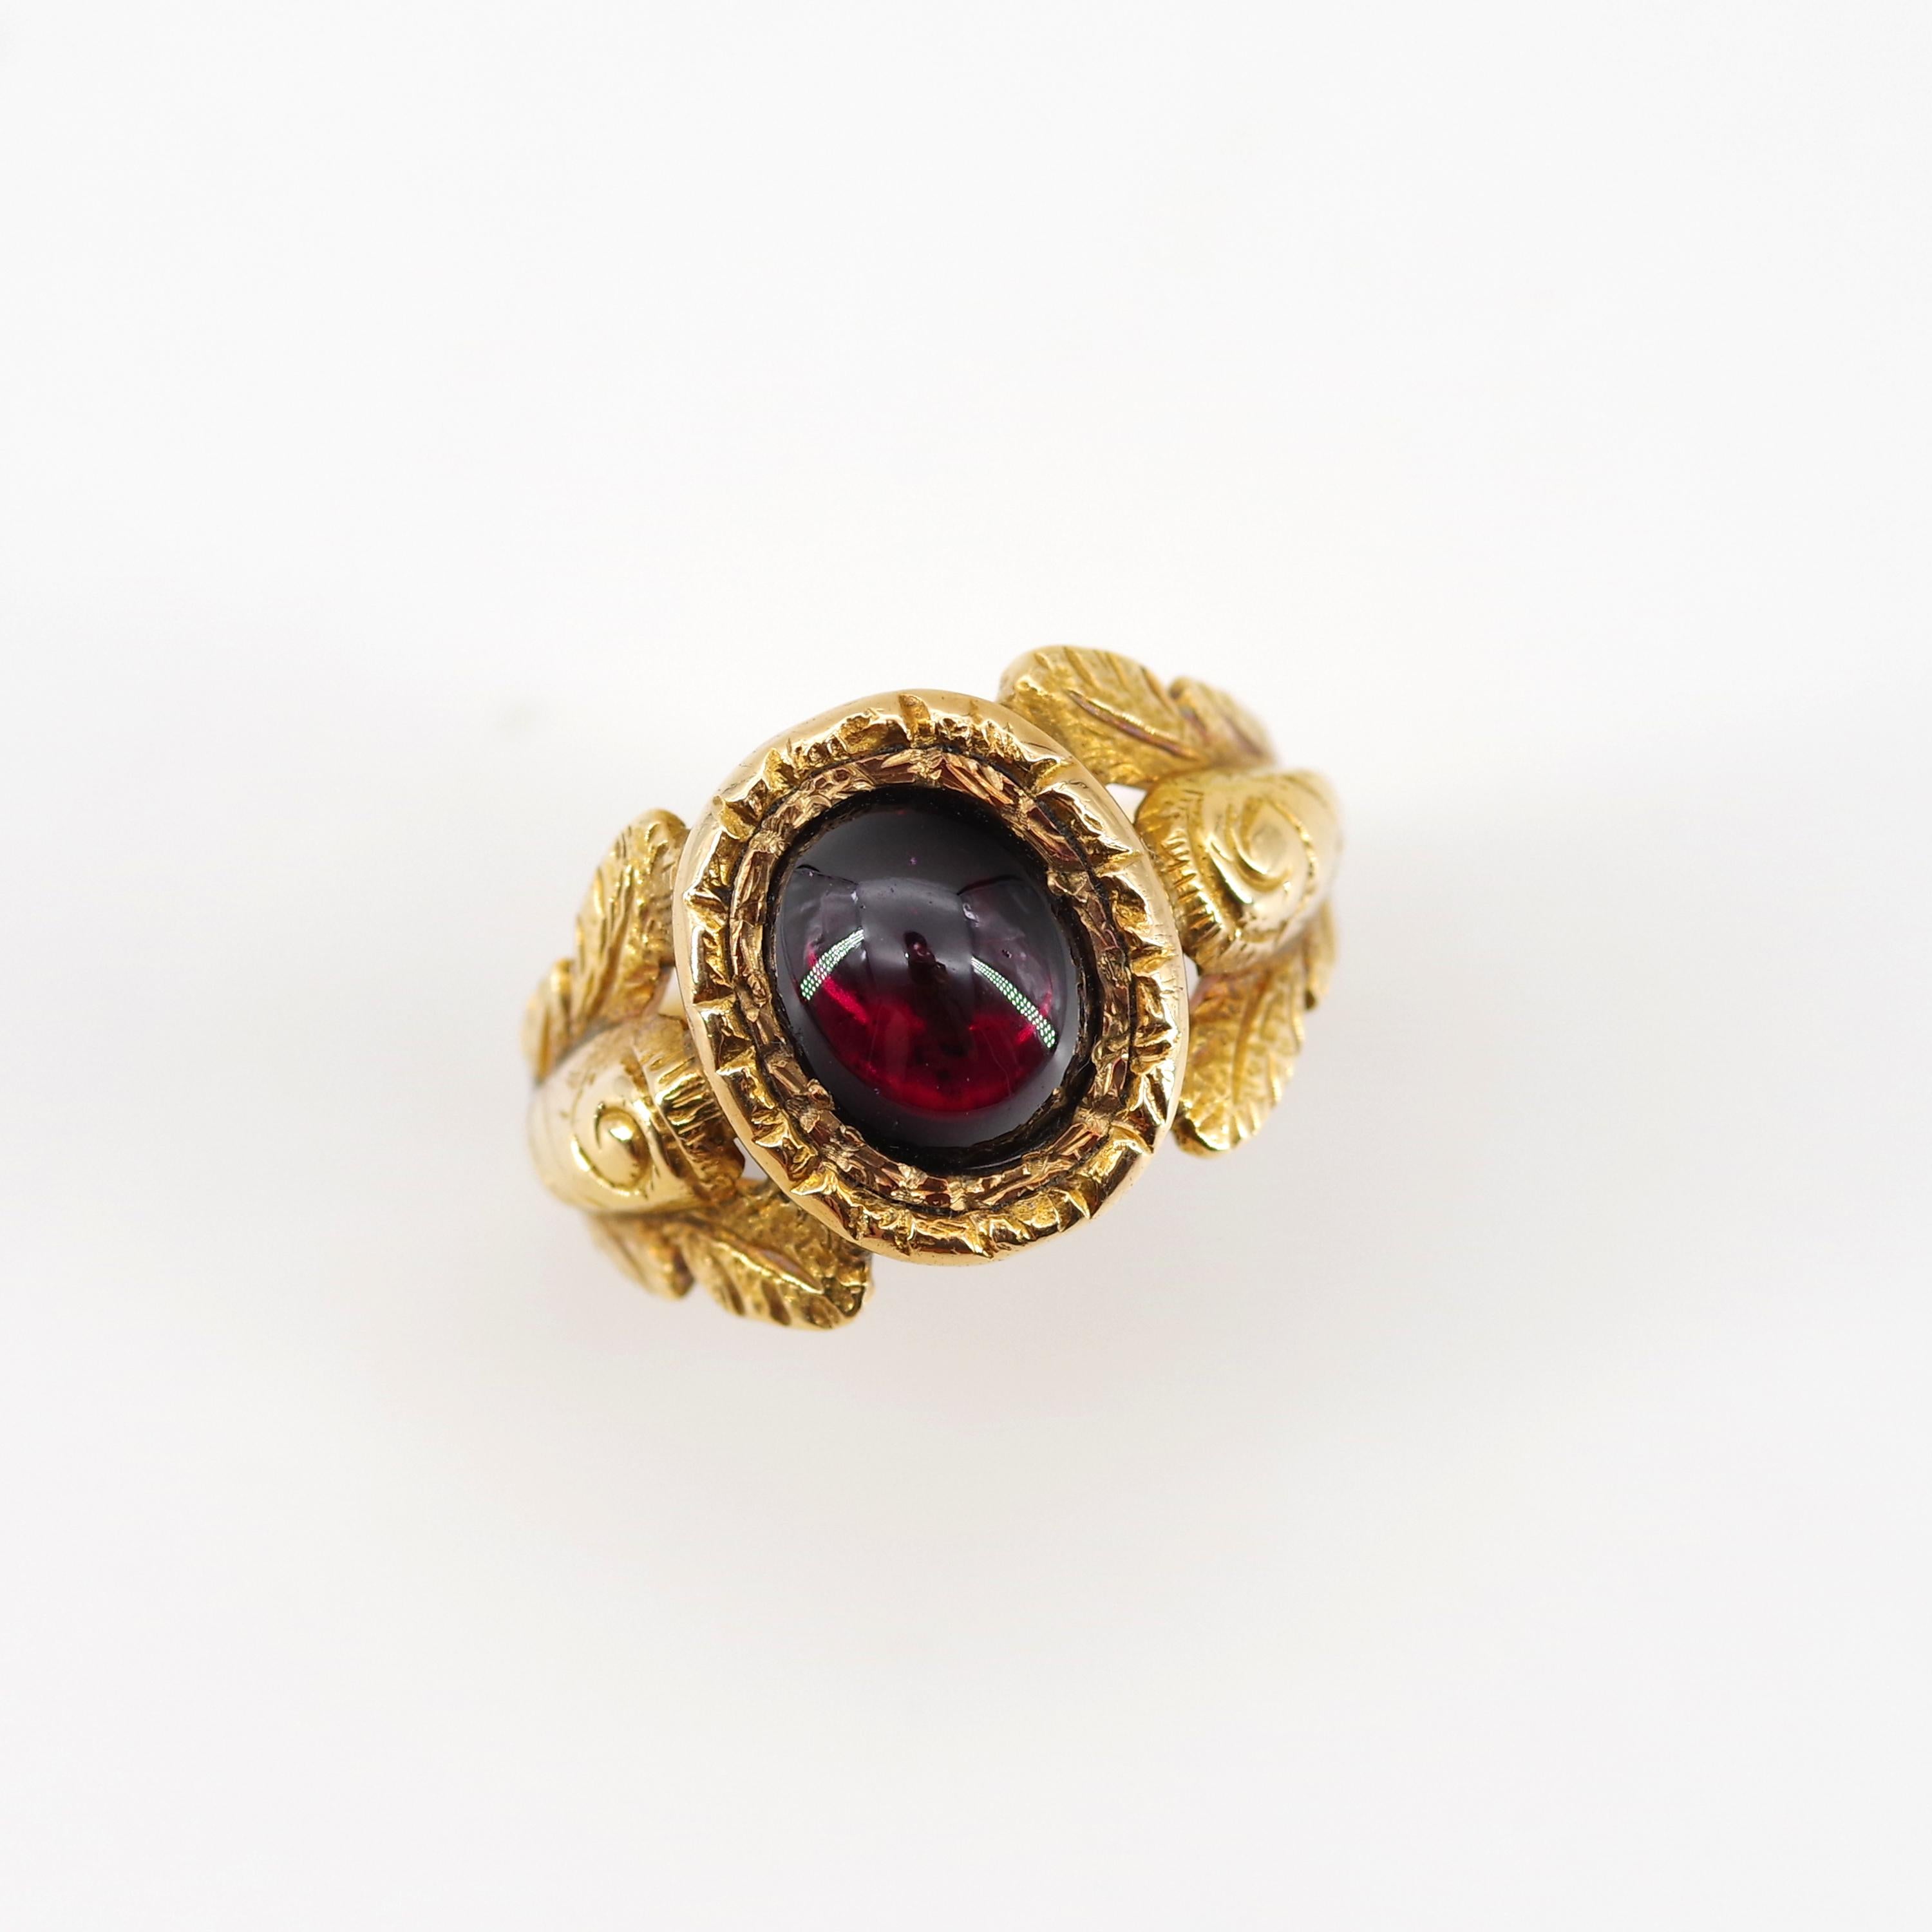 This rare and stunning original Georgian-era men's ring features a 10.5 mm x 9 mm approximately 4-carat pyrope garnet cabochon bezel-set and closed-backed into an elaborately hand-engraved and carved mounting of the richest, most buttery 18K yellow